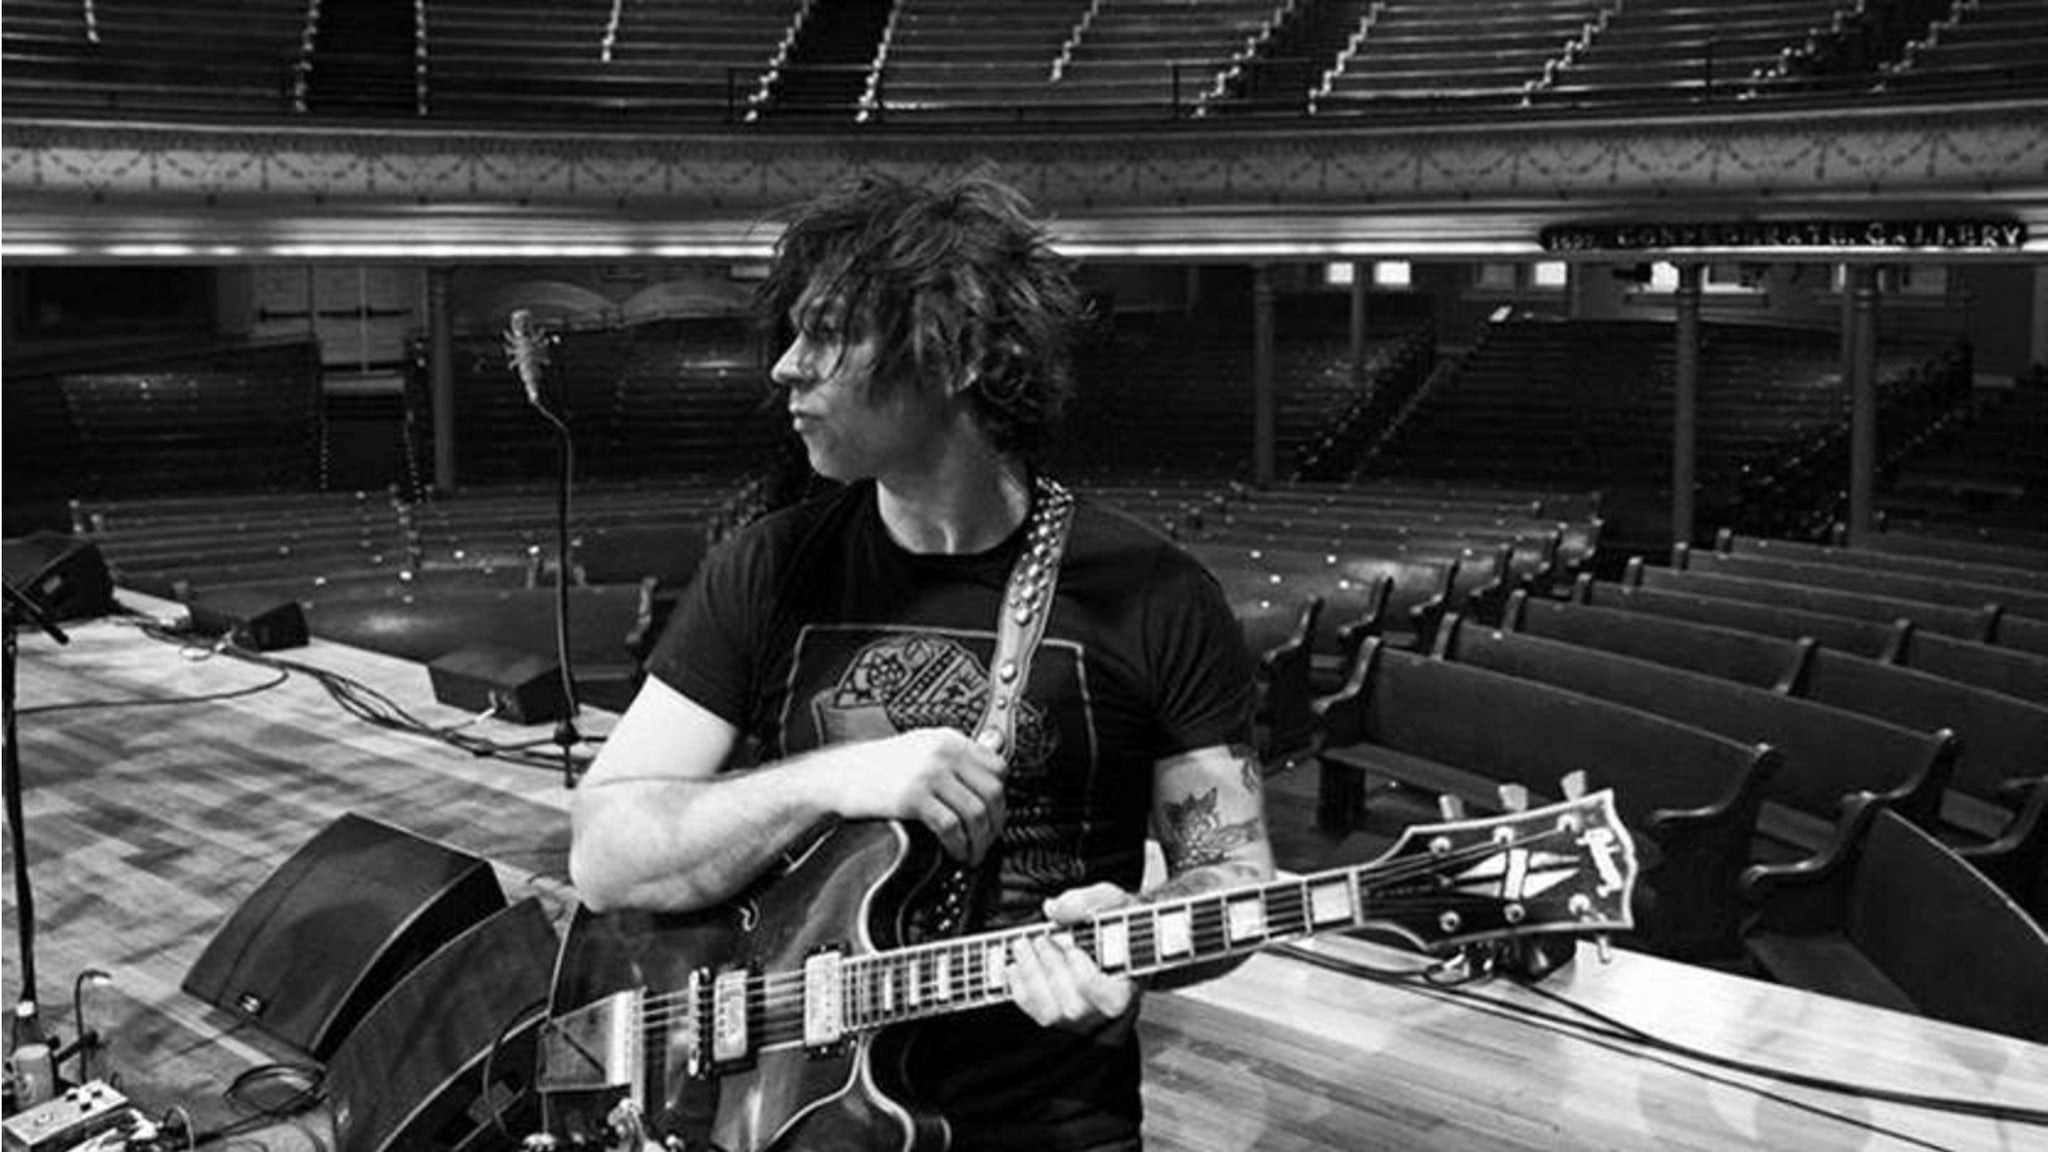 Image used with permission from Ticketmaster | Ryan Adams tickets